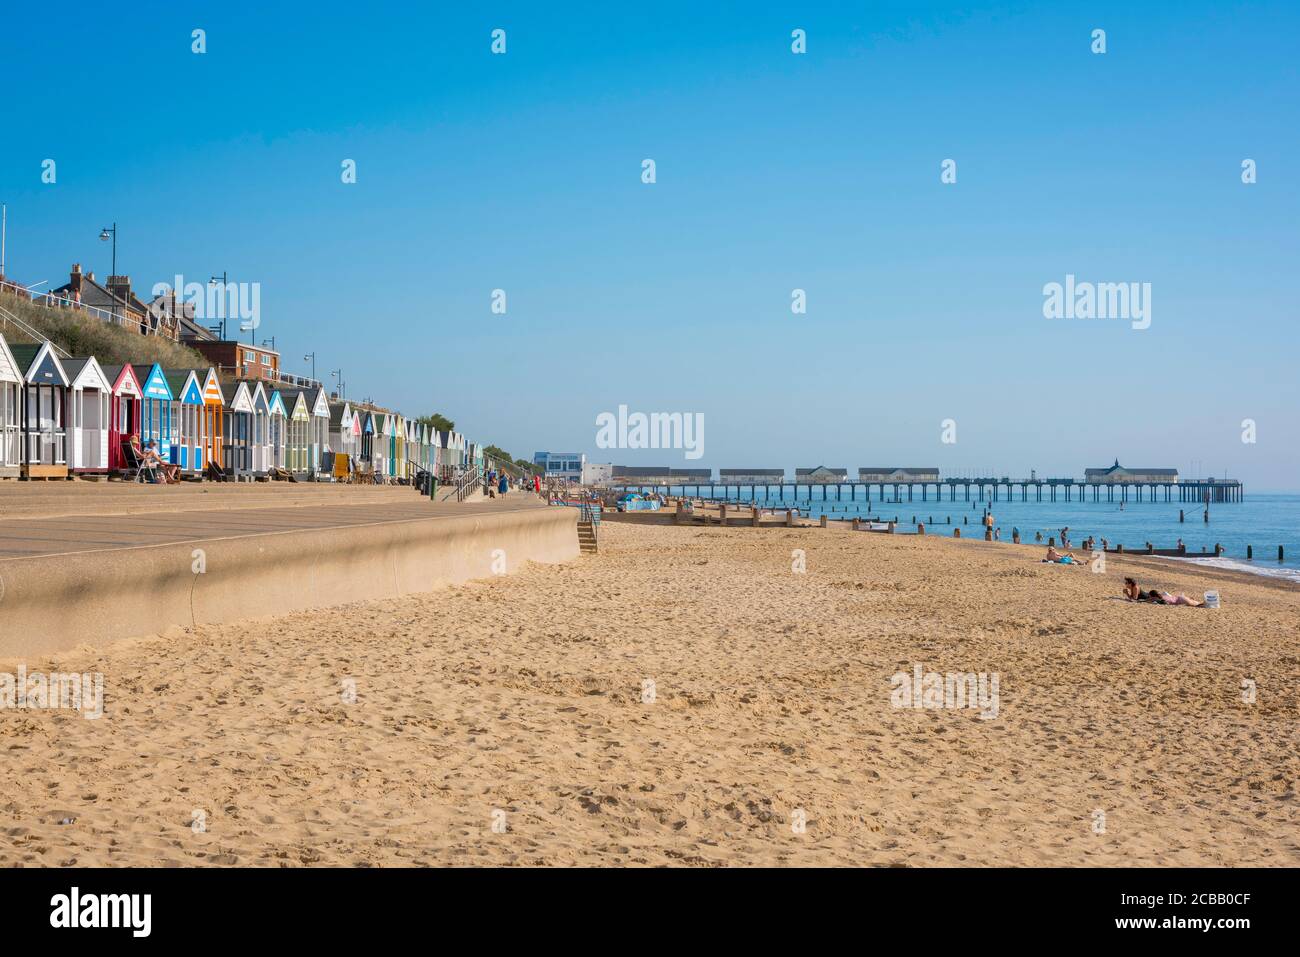 Suffolk coast UK, view in summer of an uncrowded beach along the seafront in Southwold, Suffolk, East Anglia, England, UK. Stock Photo